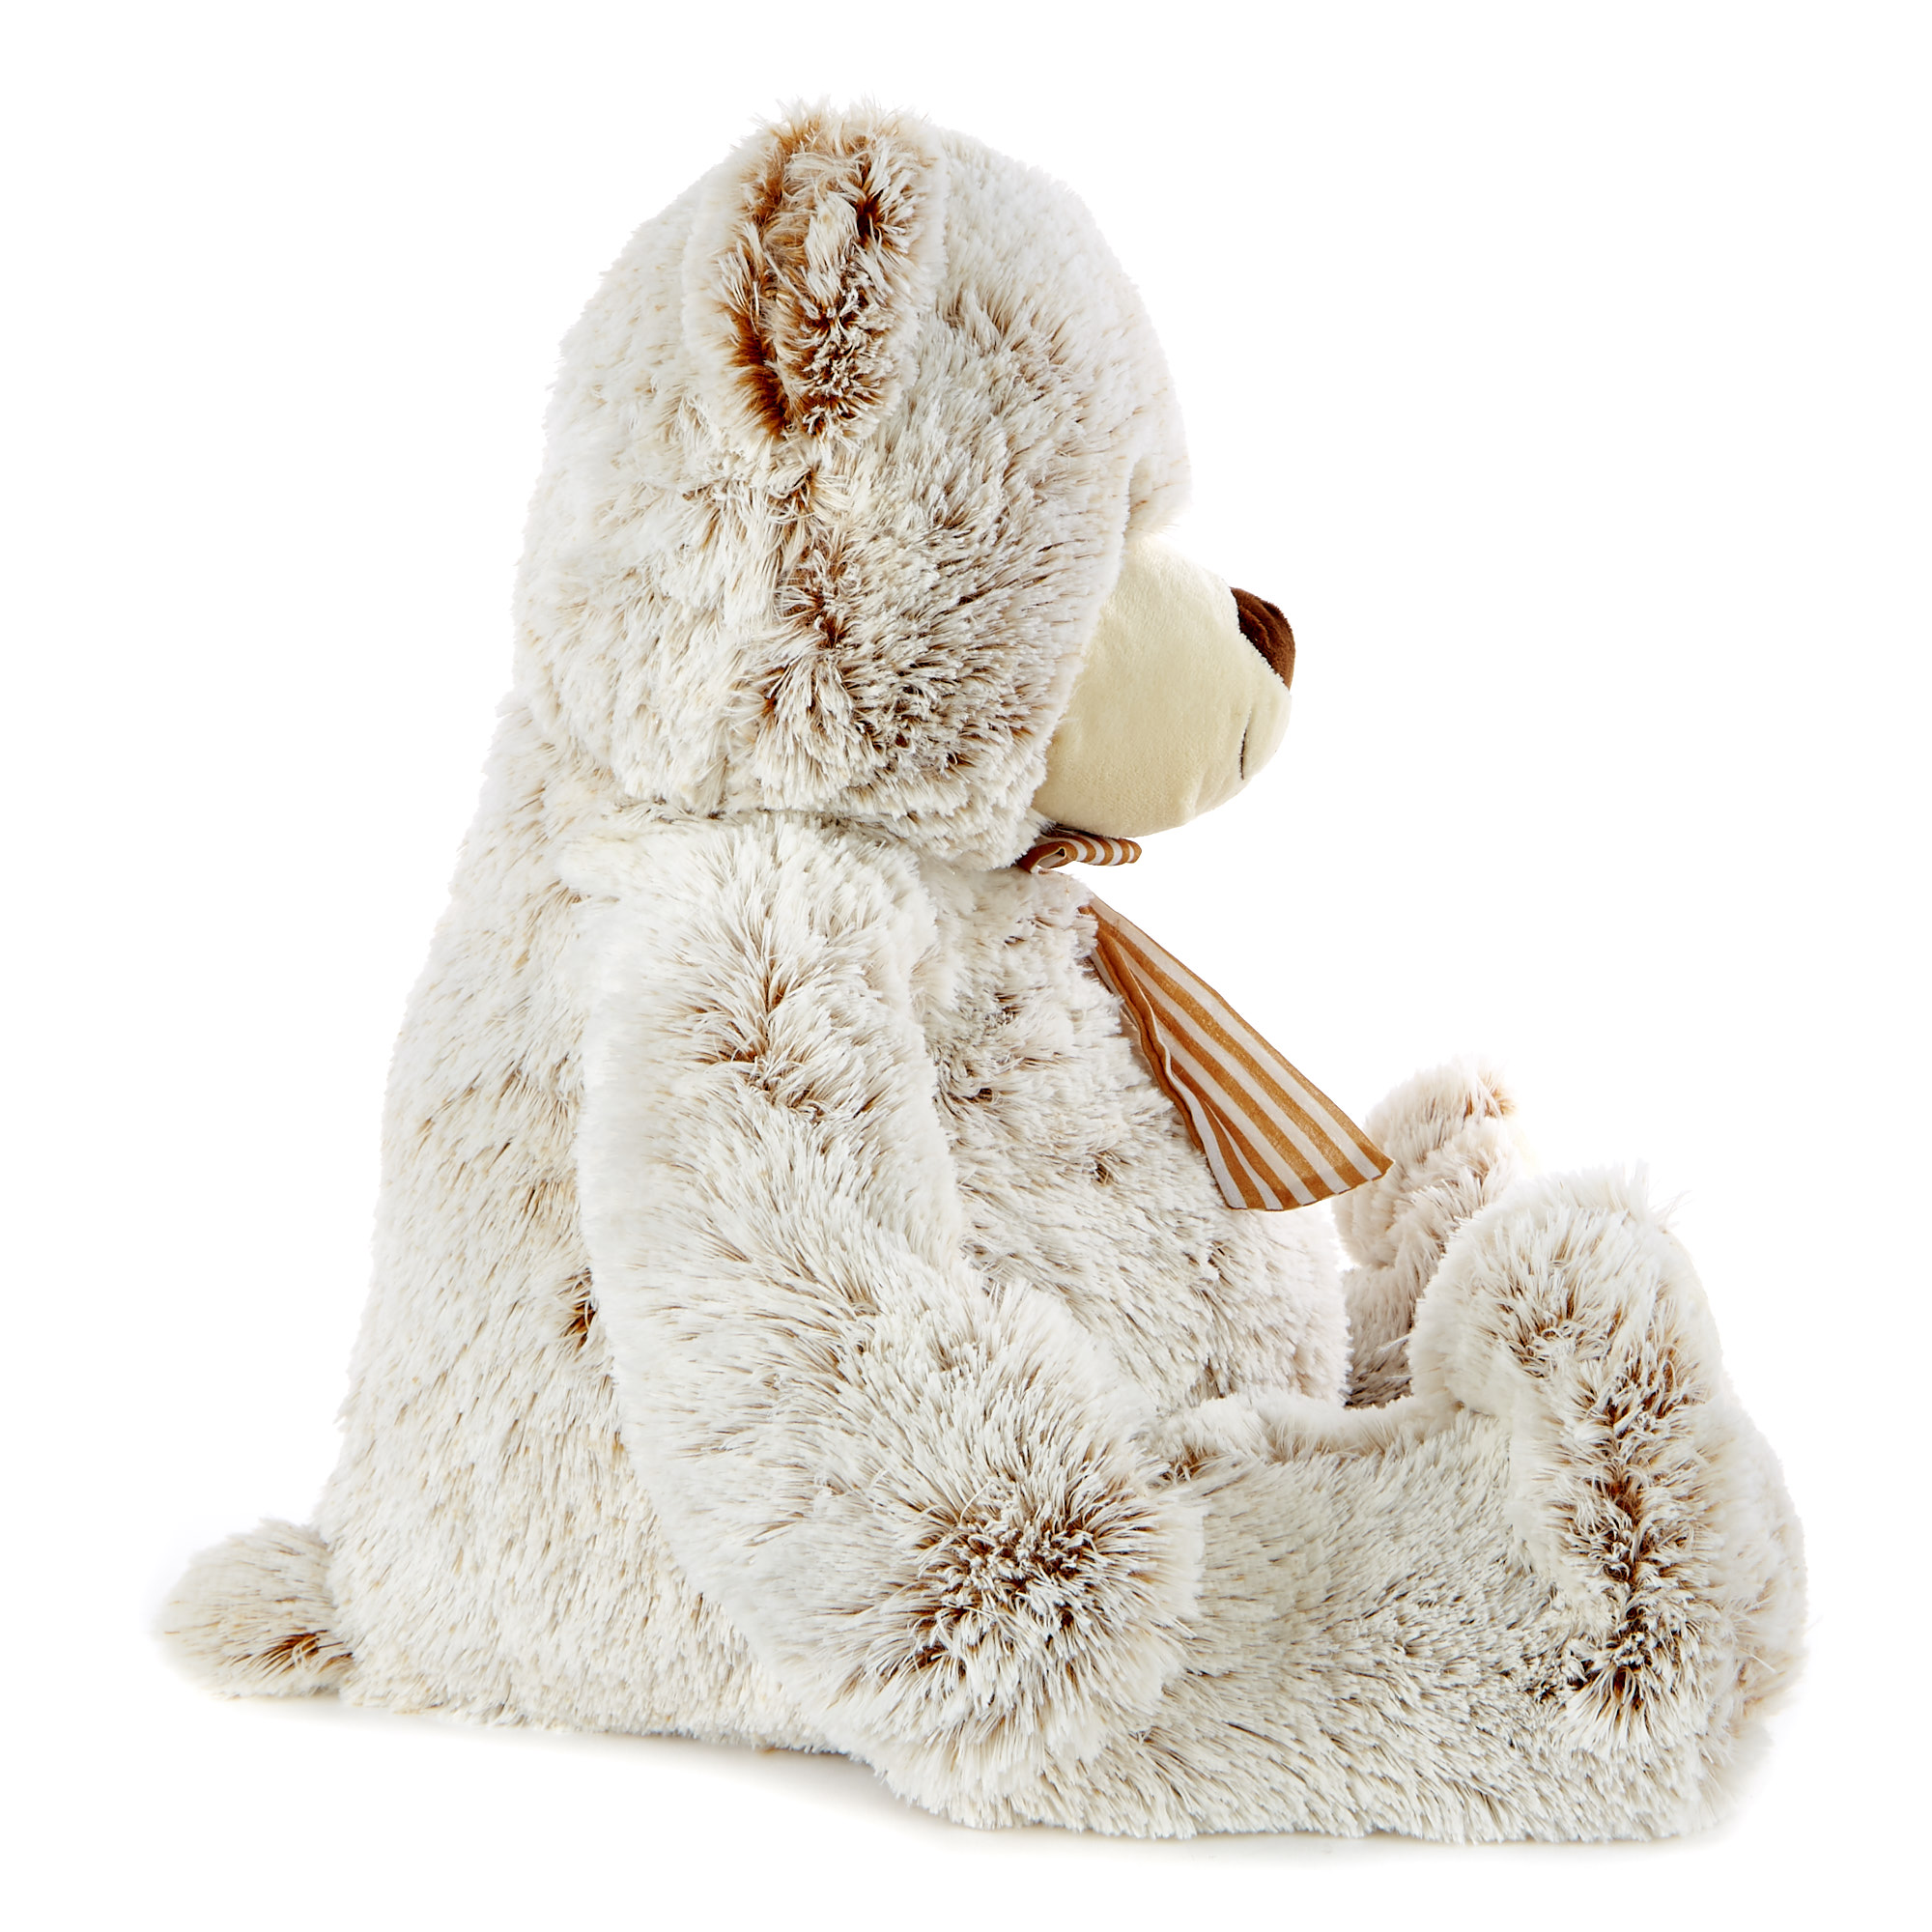 Buy Large Brown Bear Soft Toy for GBP 9 